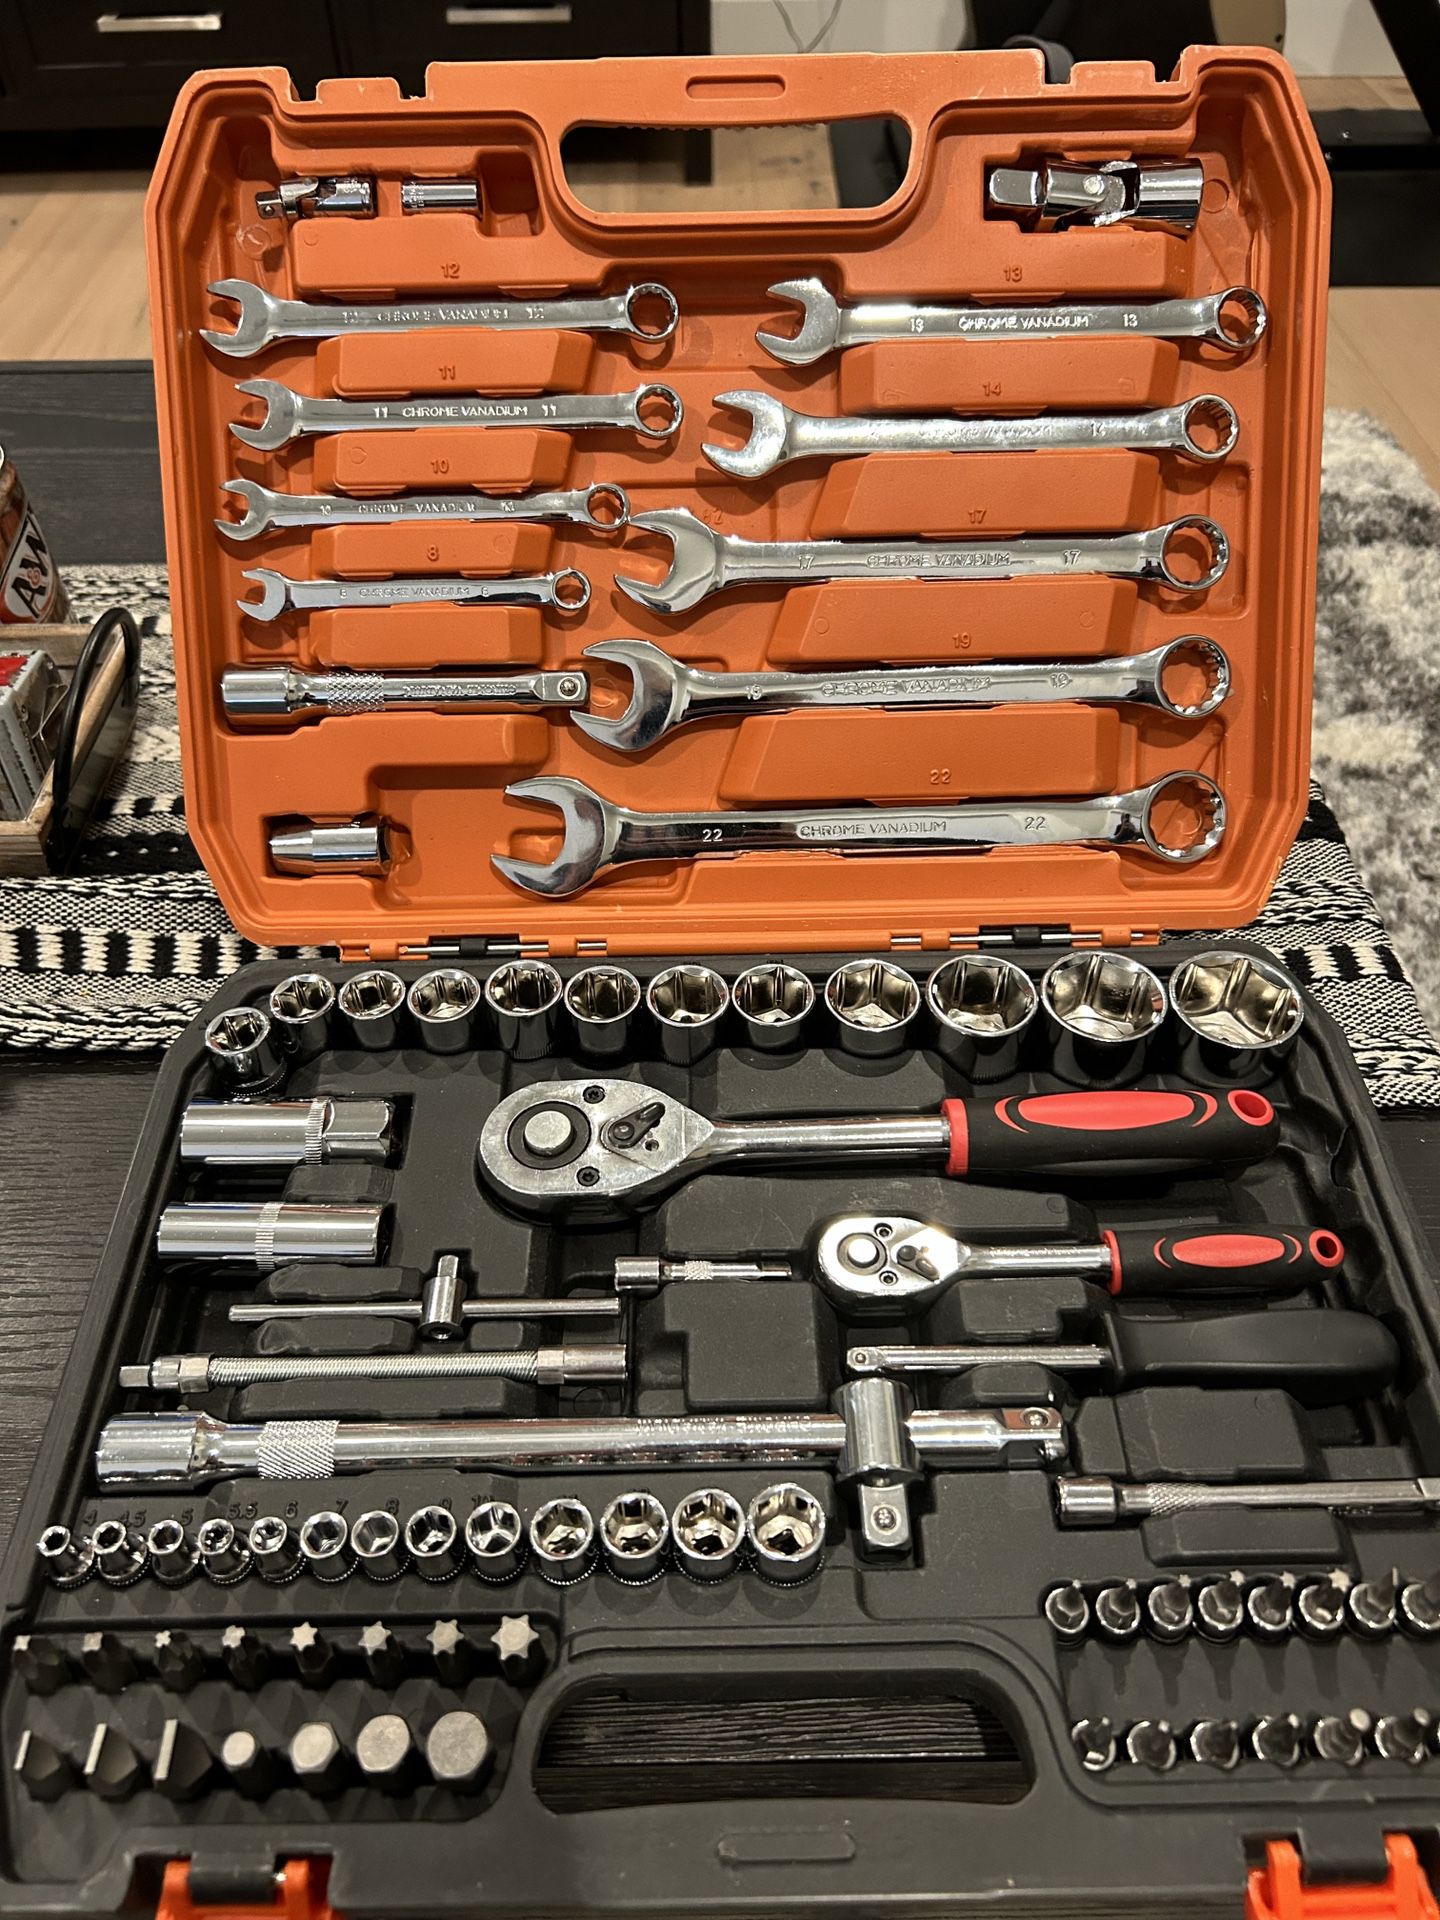 82 piece socket and wrench set with case